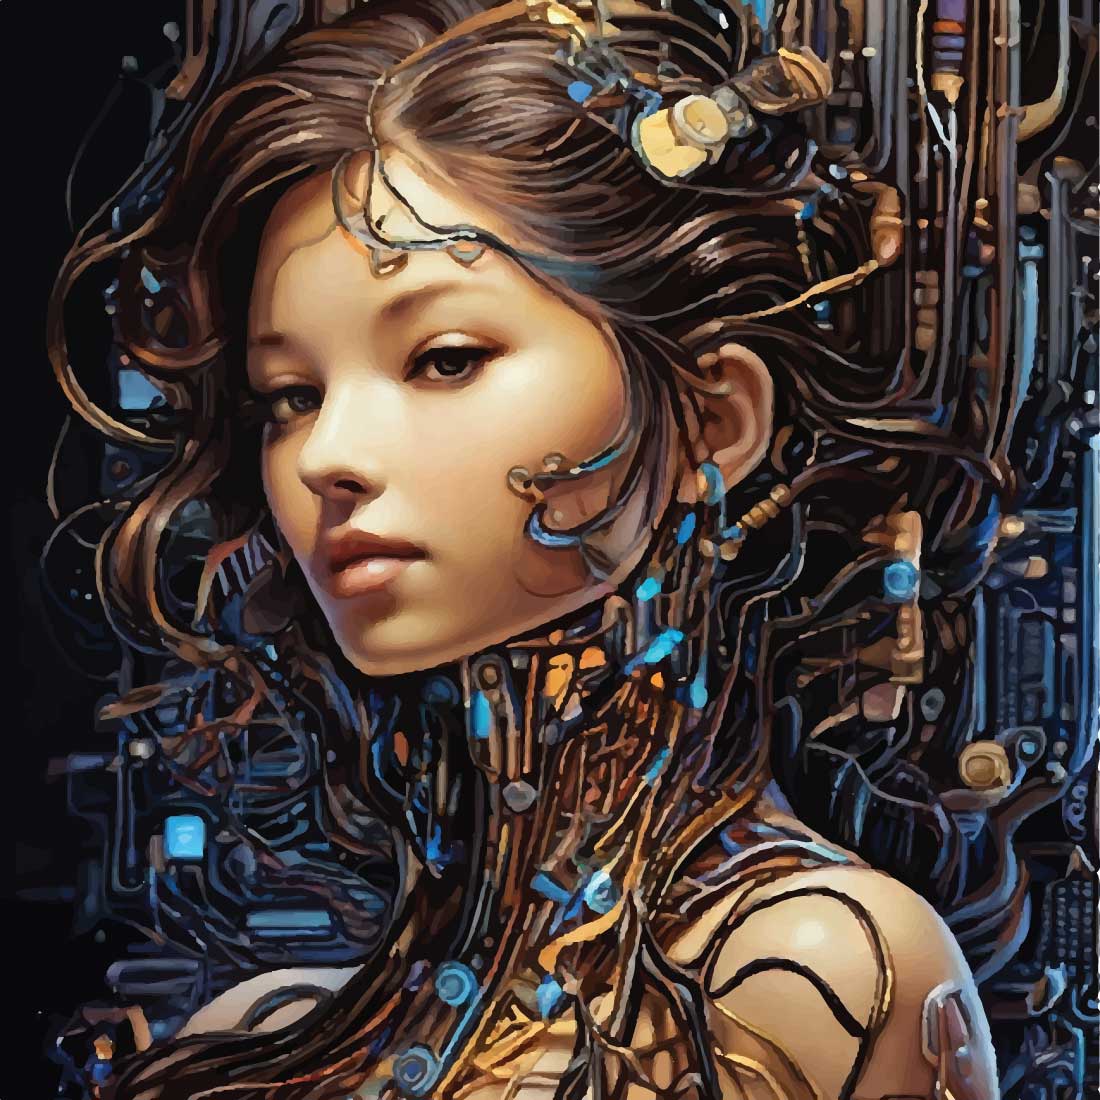 Cyborg Girl for T-shirts, Arts and Mobile back cover cover image.